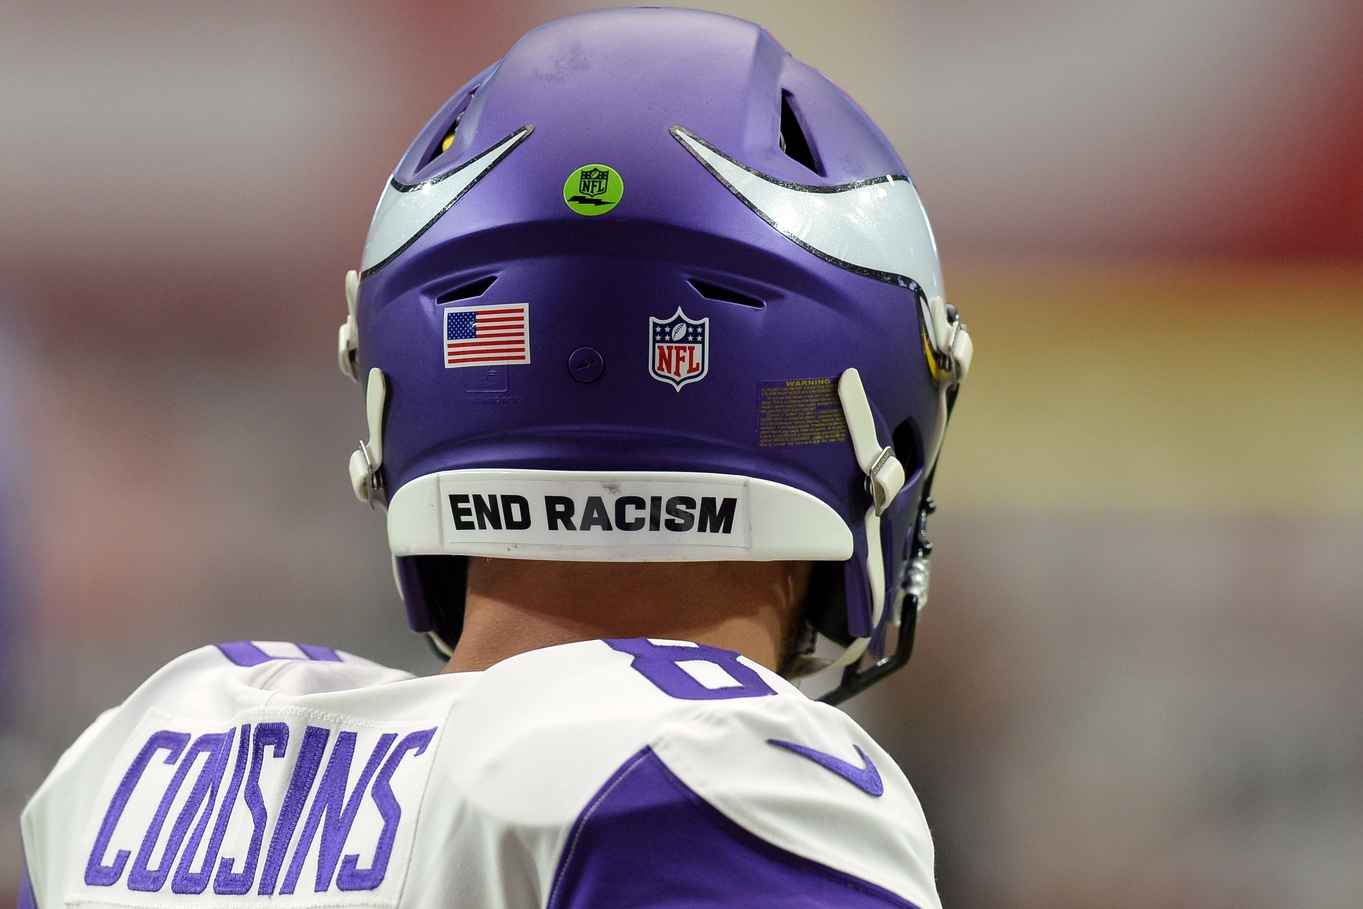 Sep 19, 2021; Glendale, Arizona, USA; An END RACISM sticker is shown on the helmet of Minnesota Vikings quarterback Kirk Cousins (8) prior to the game against the Arizona Cardinals at State Farm Stadium.